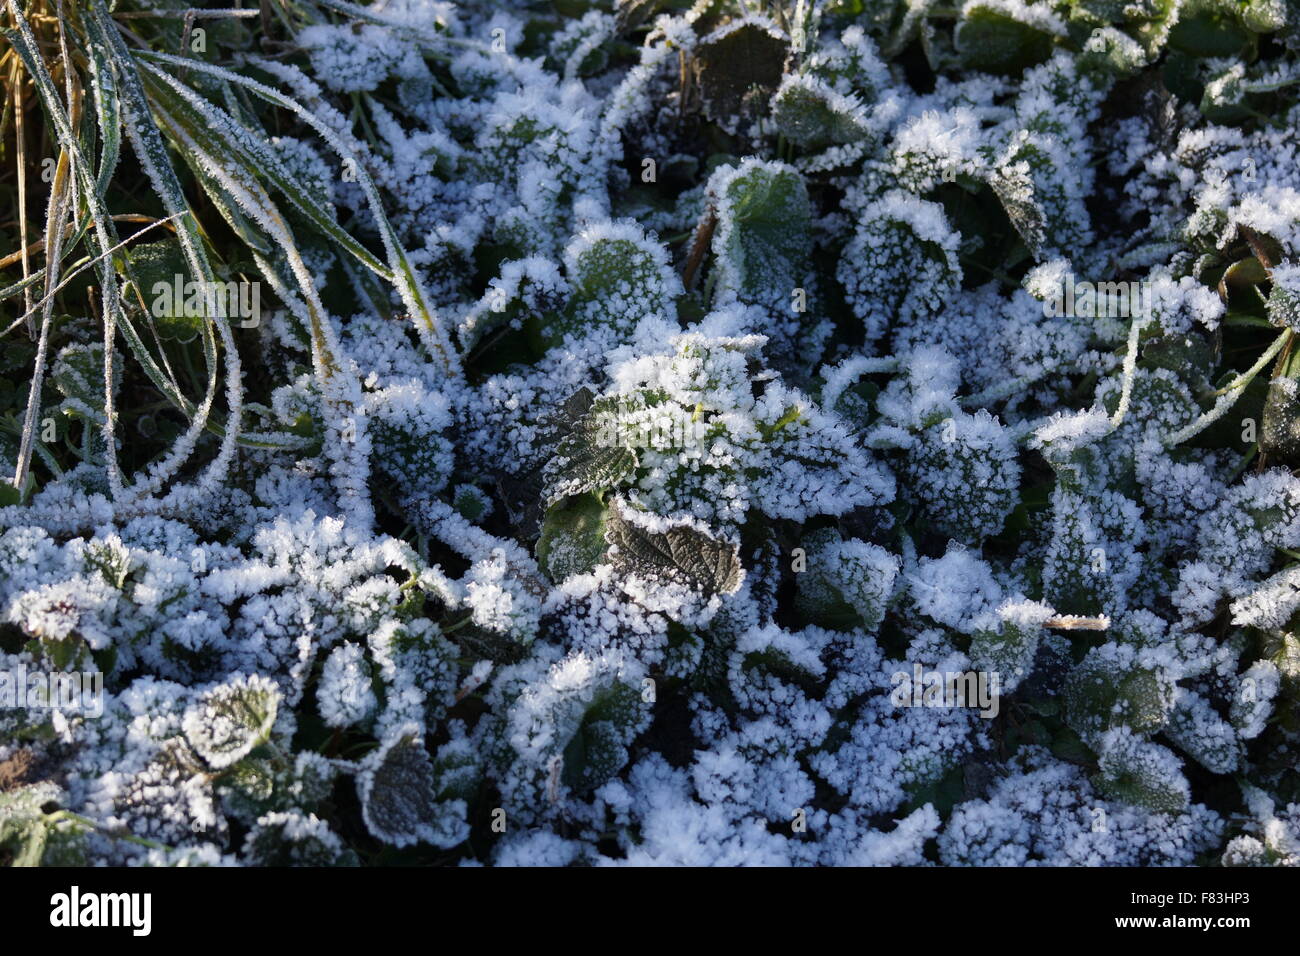 Large crystals of frost on the green grass. Stock Photo